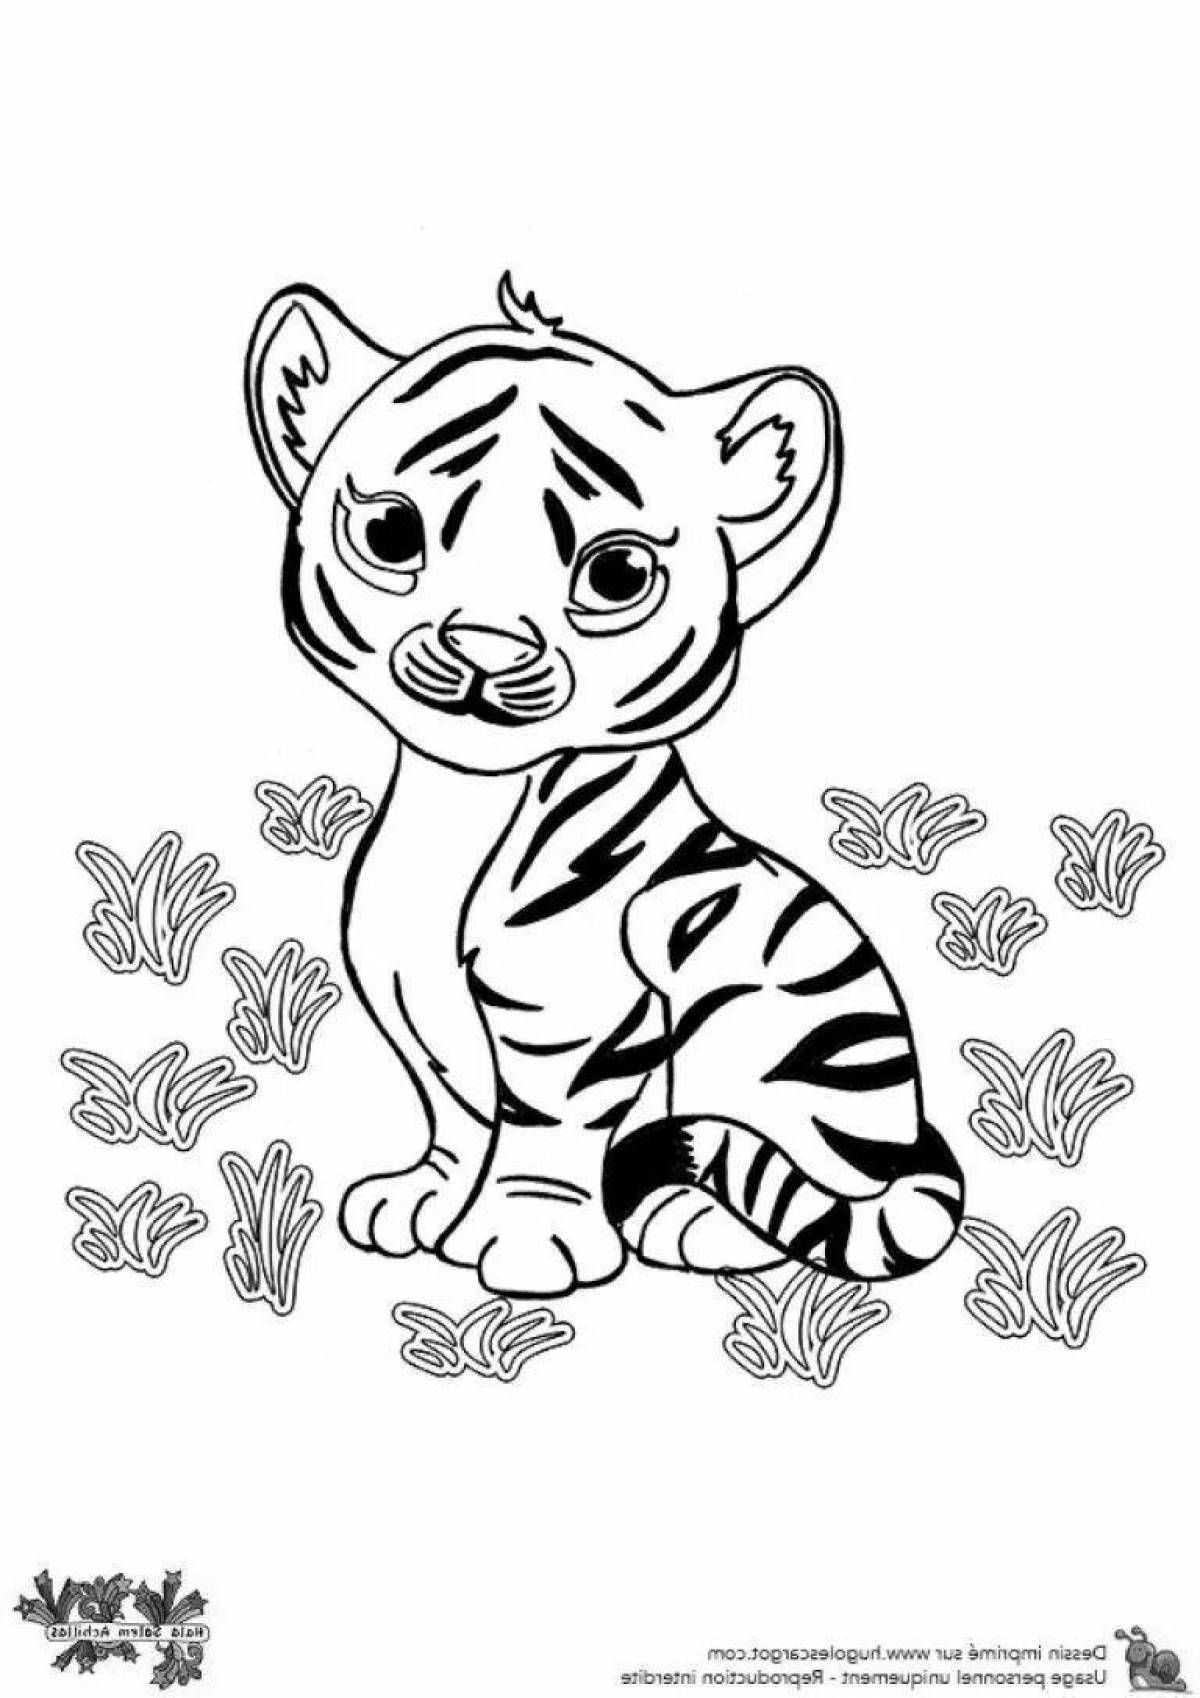 Awesome tiger coloring page for kids